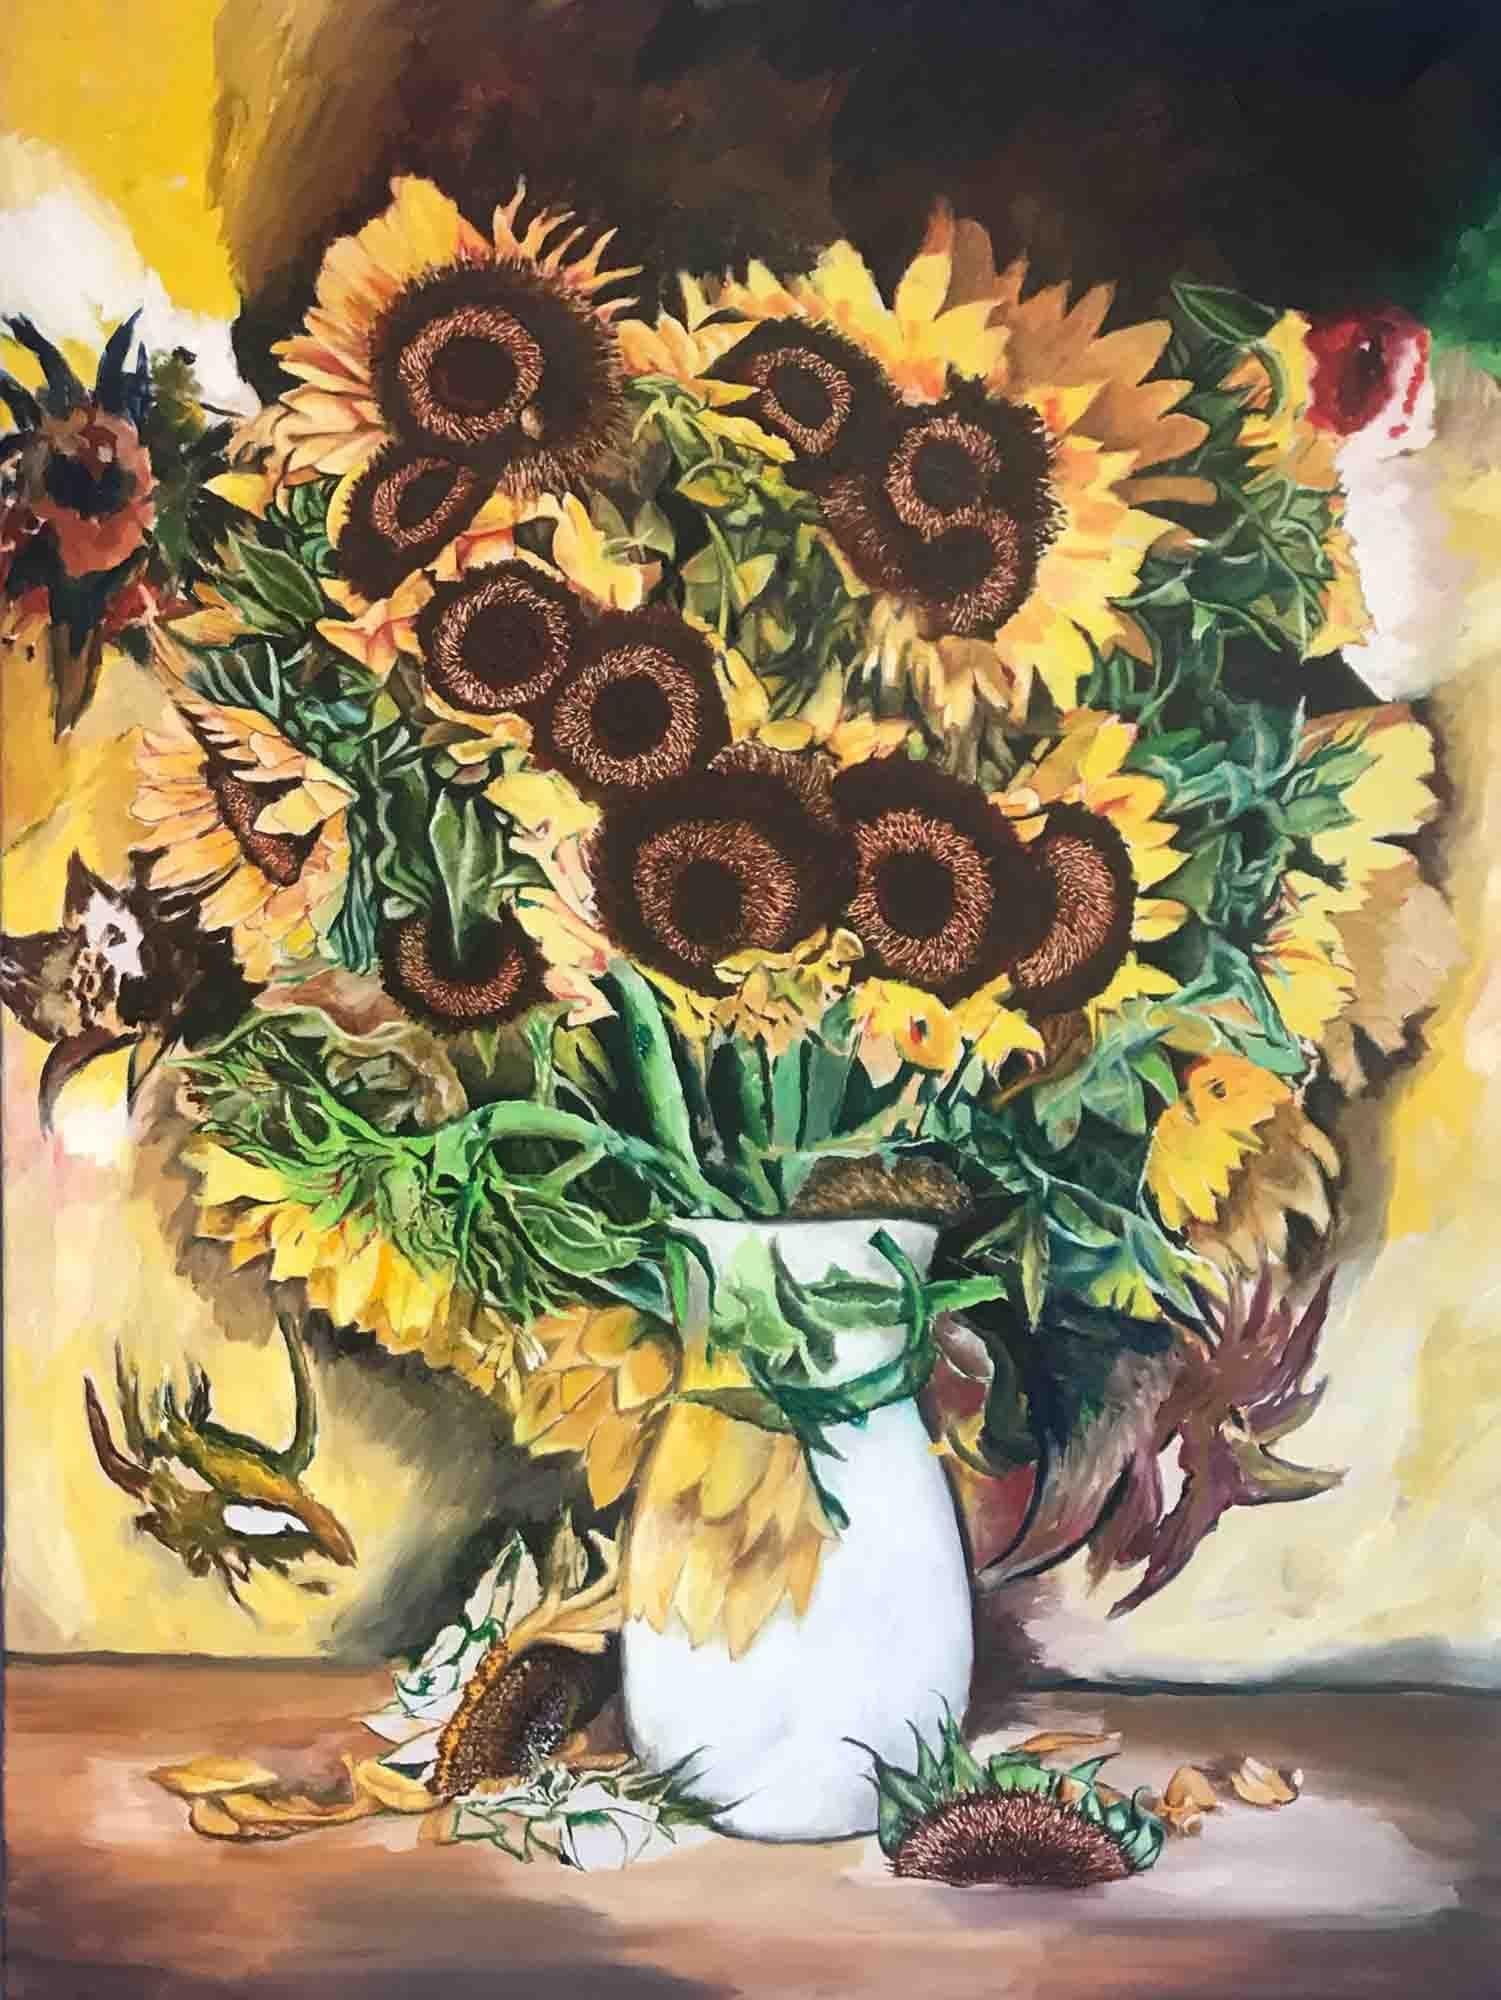 This painting was inspired by Vincent Van Gogh's "Sunflowers". I came up with my own image based on 3 still images merge into 1.  :: Painting :: Contemporary :: This piece comes with an official certificate of authenticity signed by the artist ::